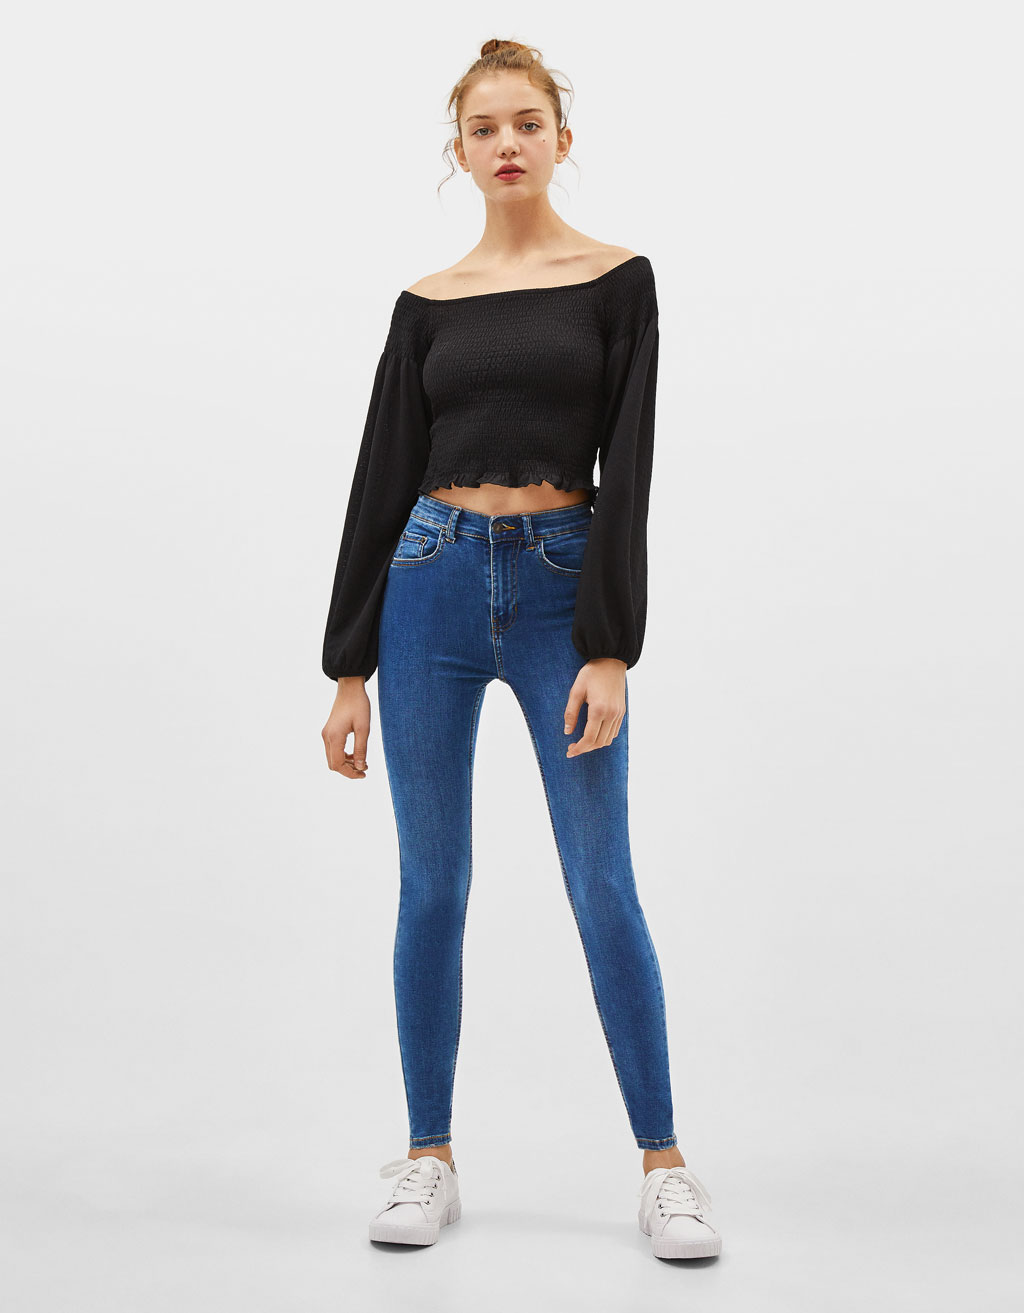 Bershka high waist jeans in the 80 s online stores